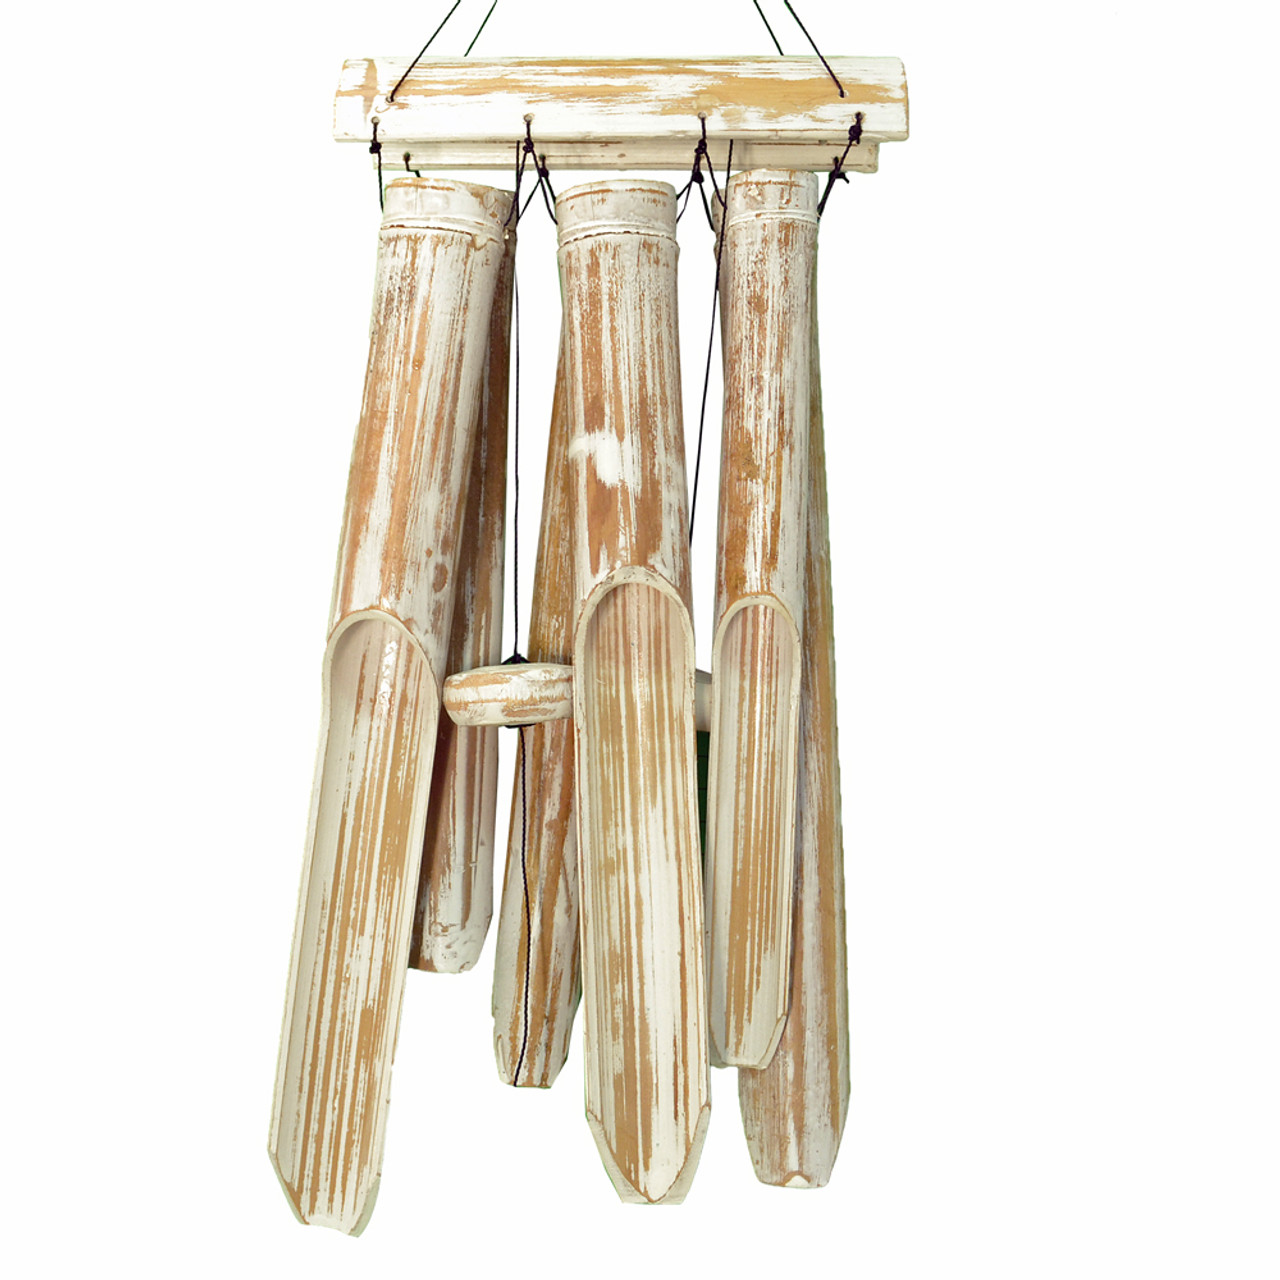 Outdoor Home Decor bamboo white wash petite double chime
20cmx 45xm